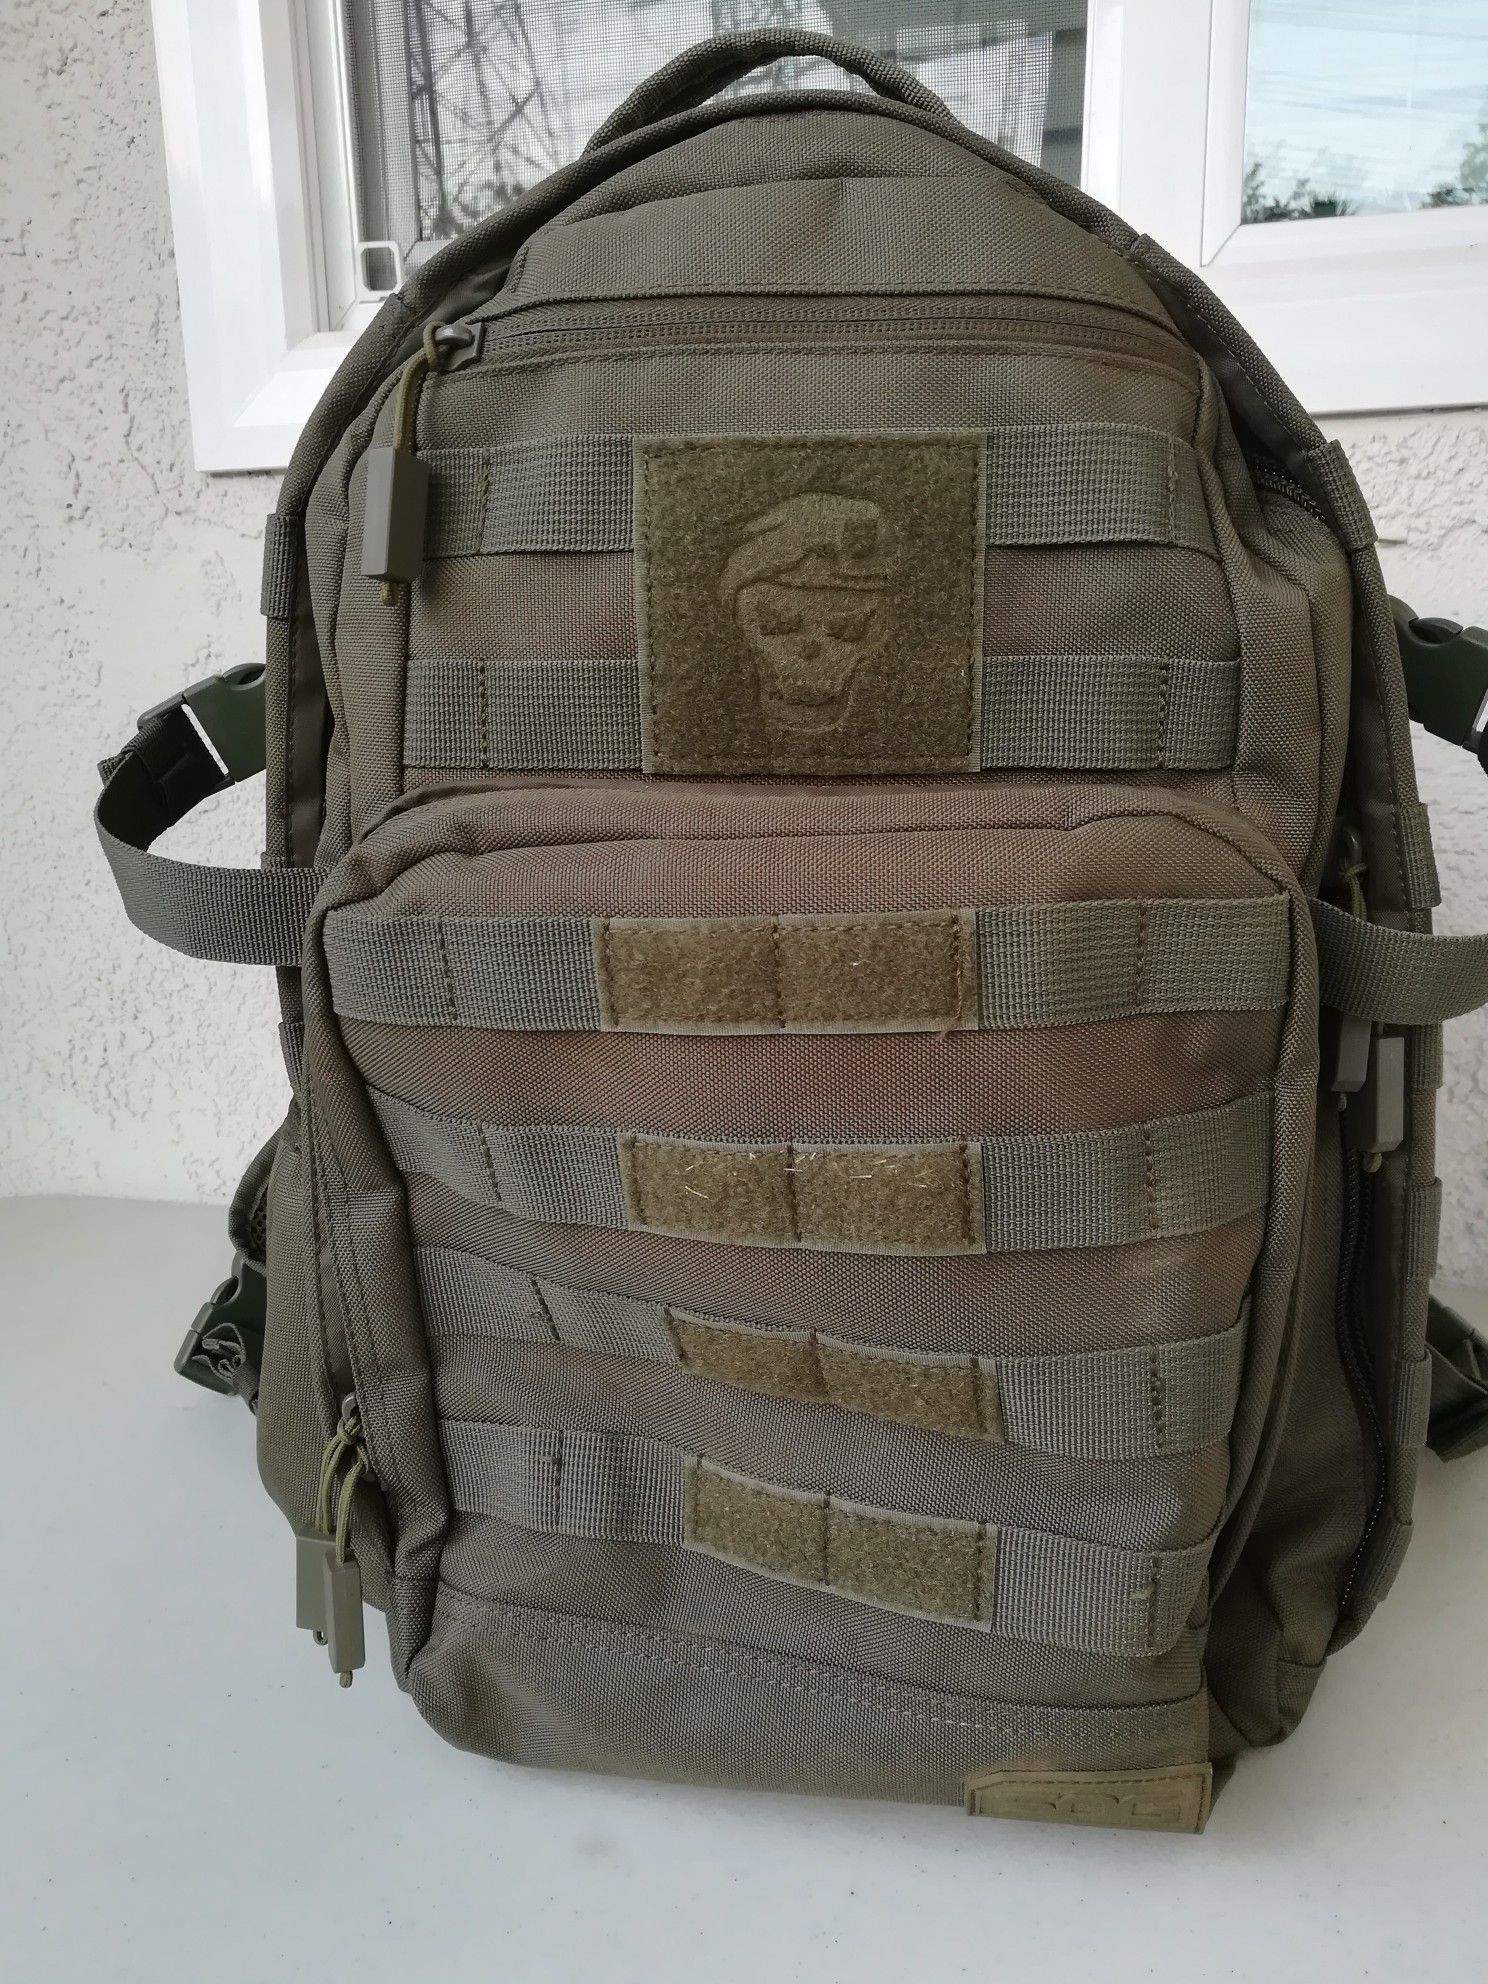 Used SOG Ninja Tactical Day Pack, 24.2 L with One Tigris Drawstring Water Bottle Holder